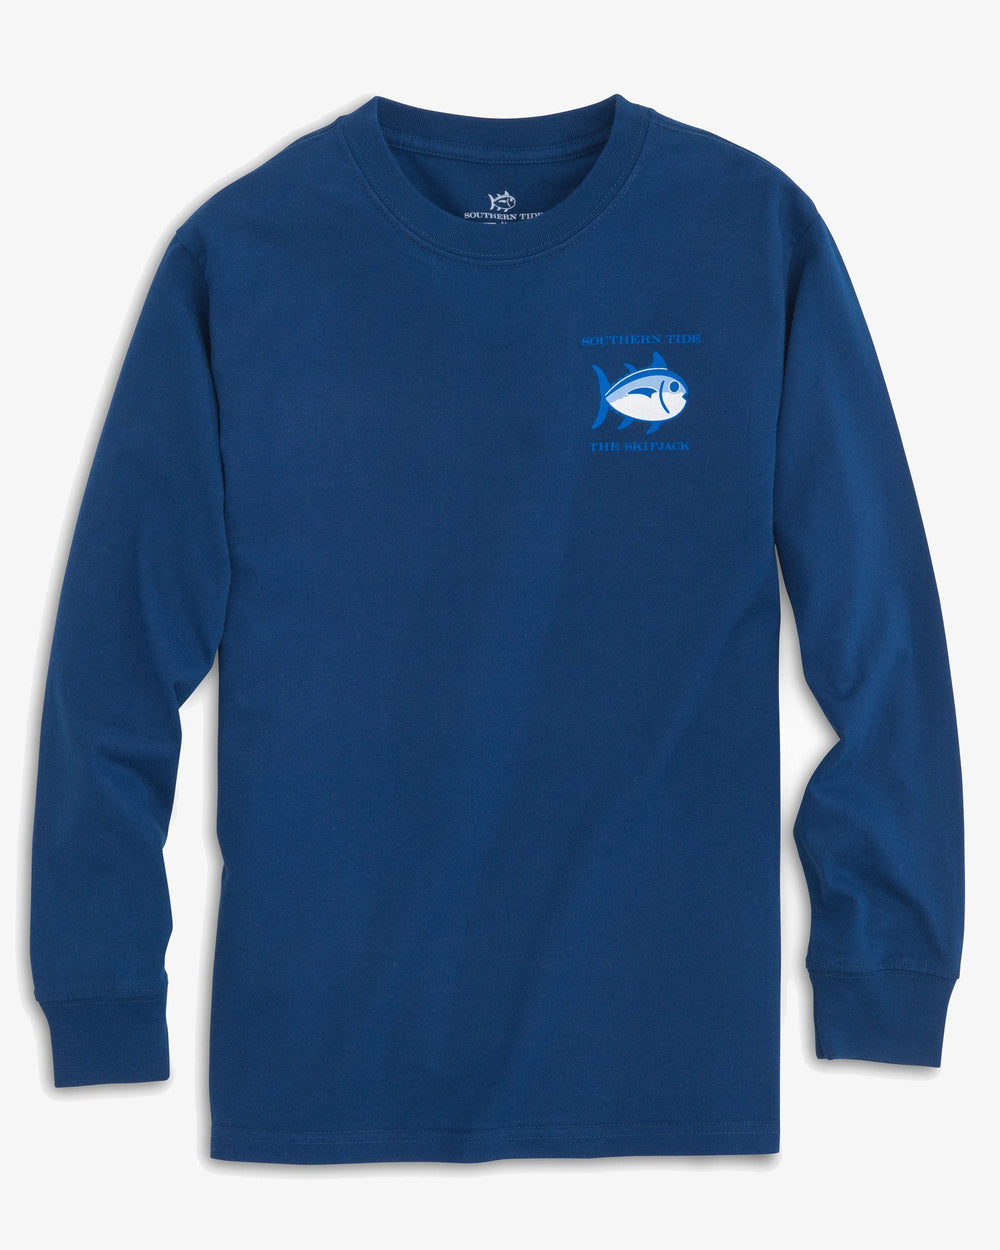 The front view of the Southern Tide Kids Long Sleeve Original Skipjack T-Shirt by Southern Tide - Yacht Blue 